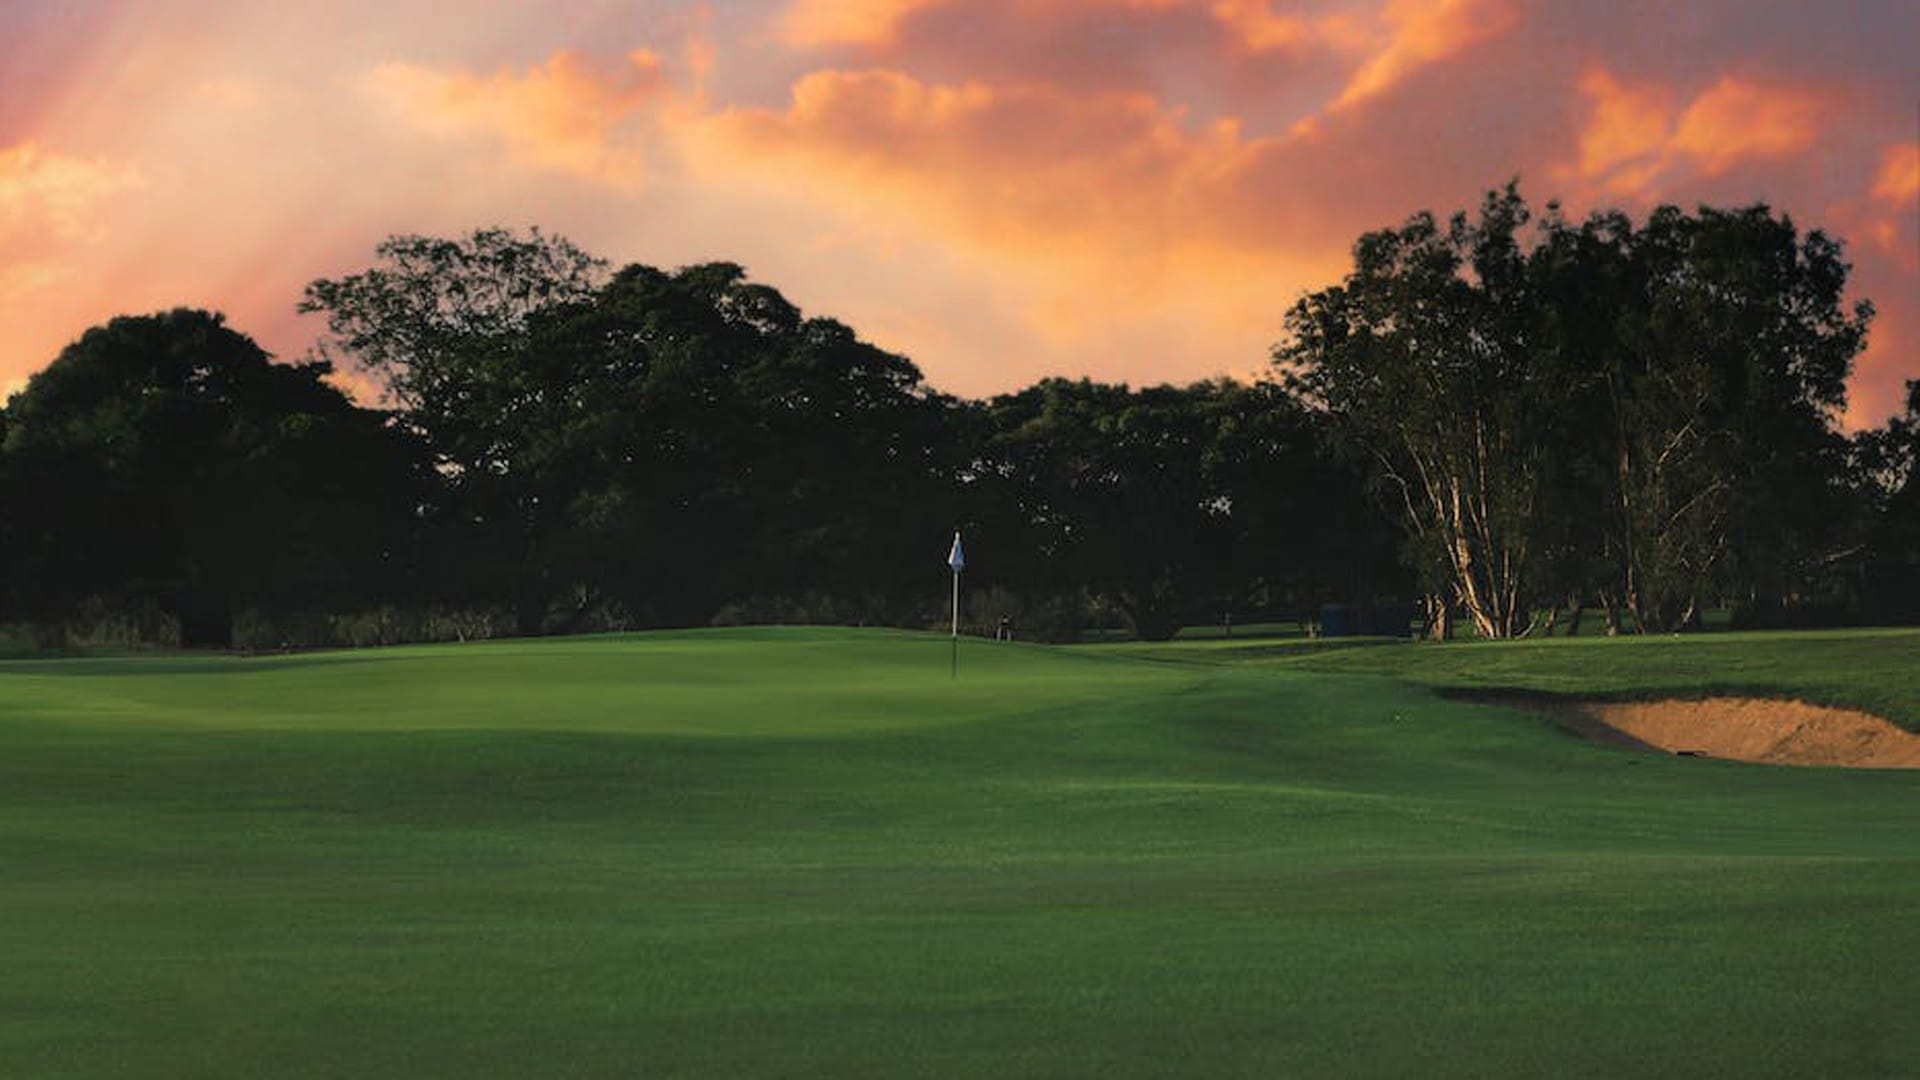 A photo of a golf hole with a fiery sunset behind